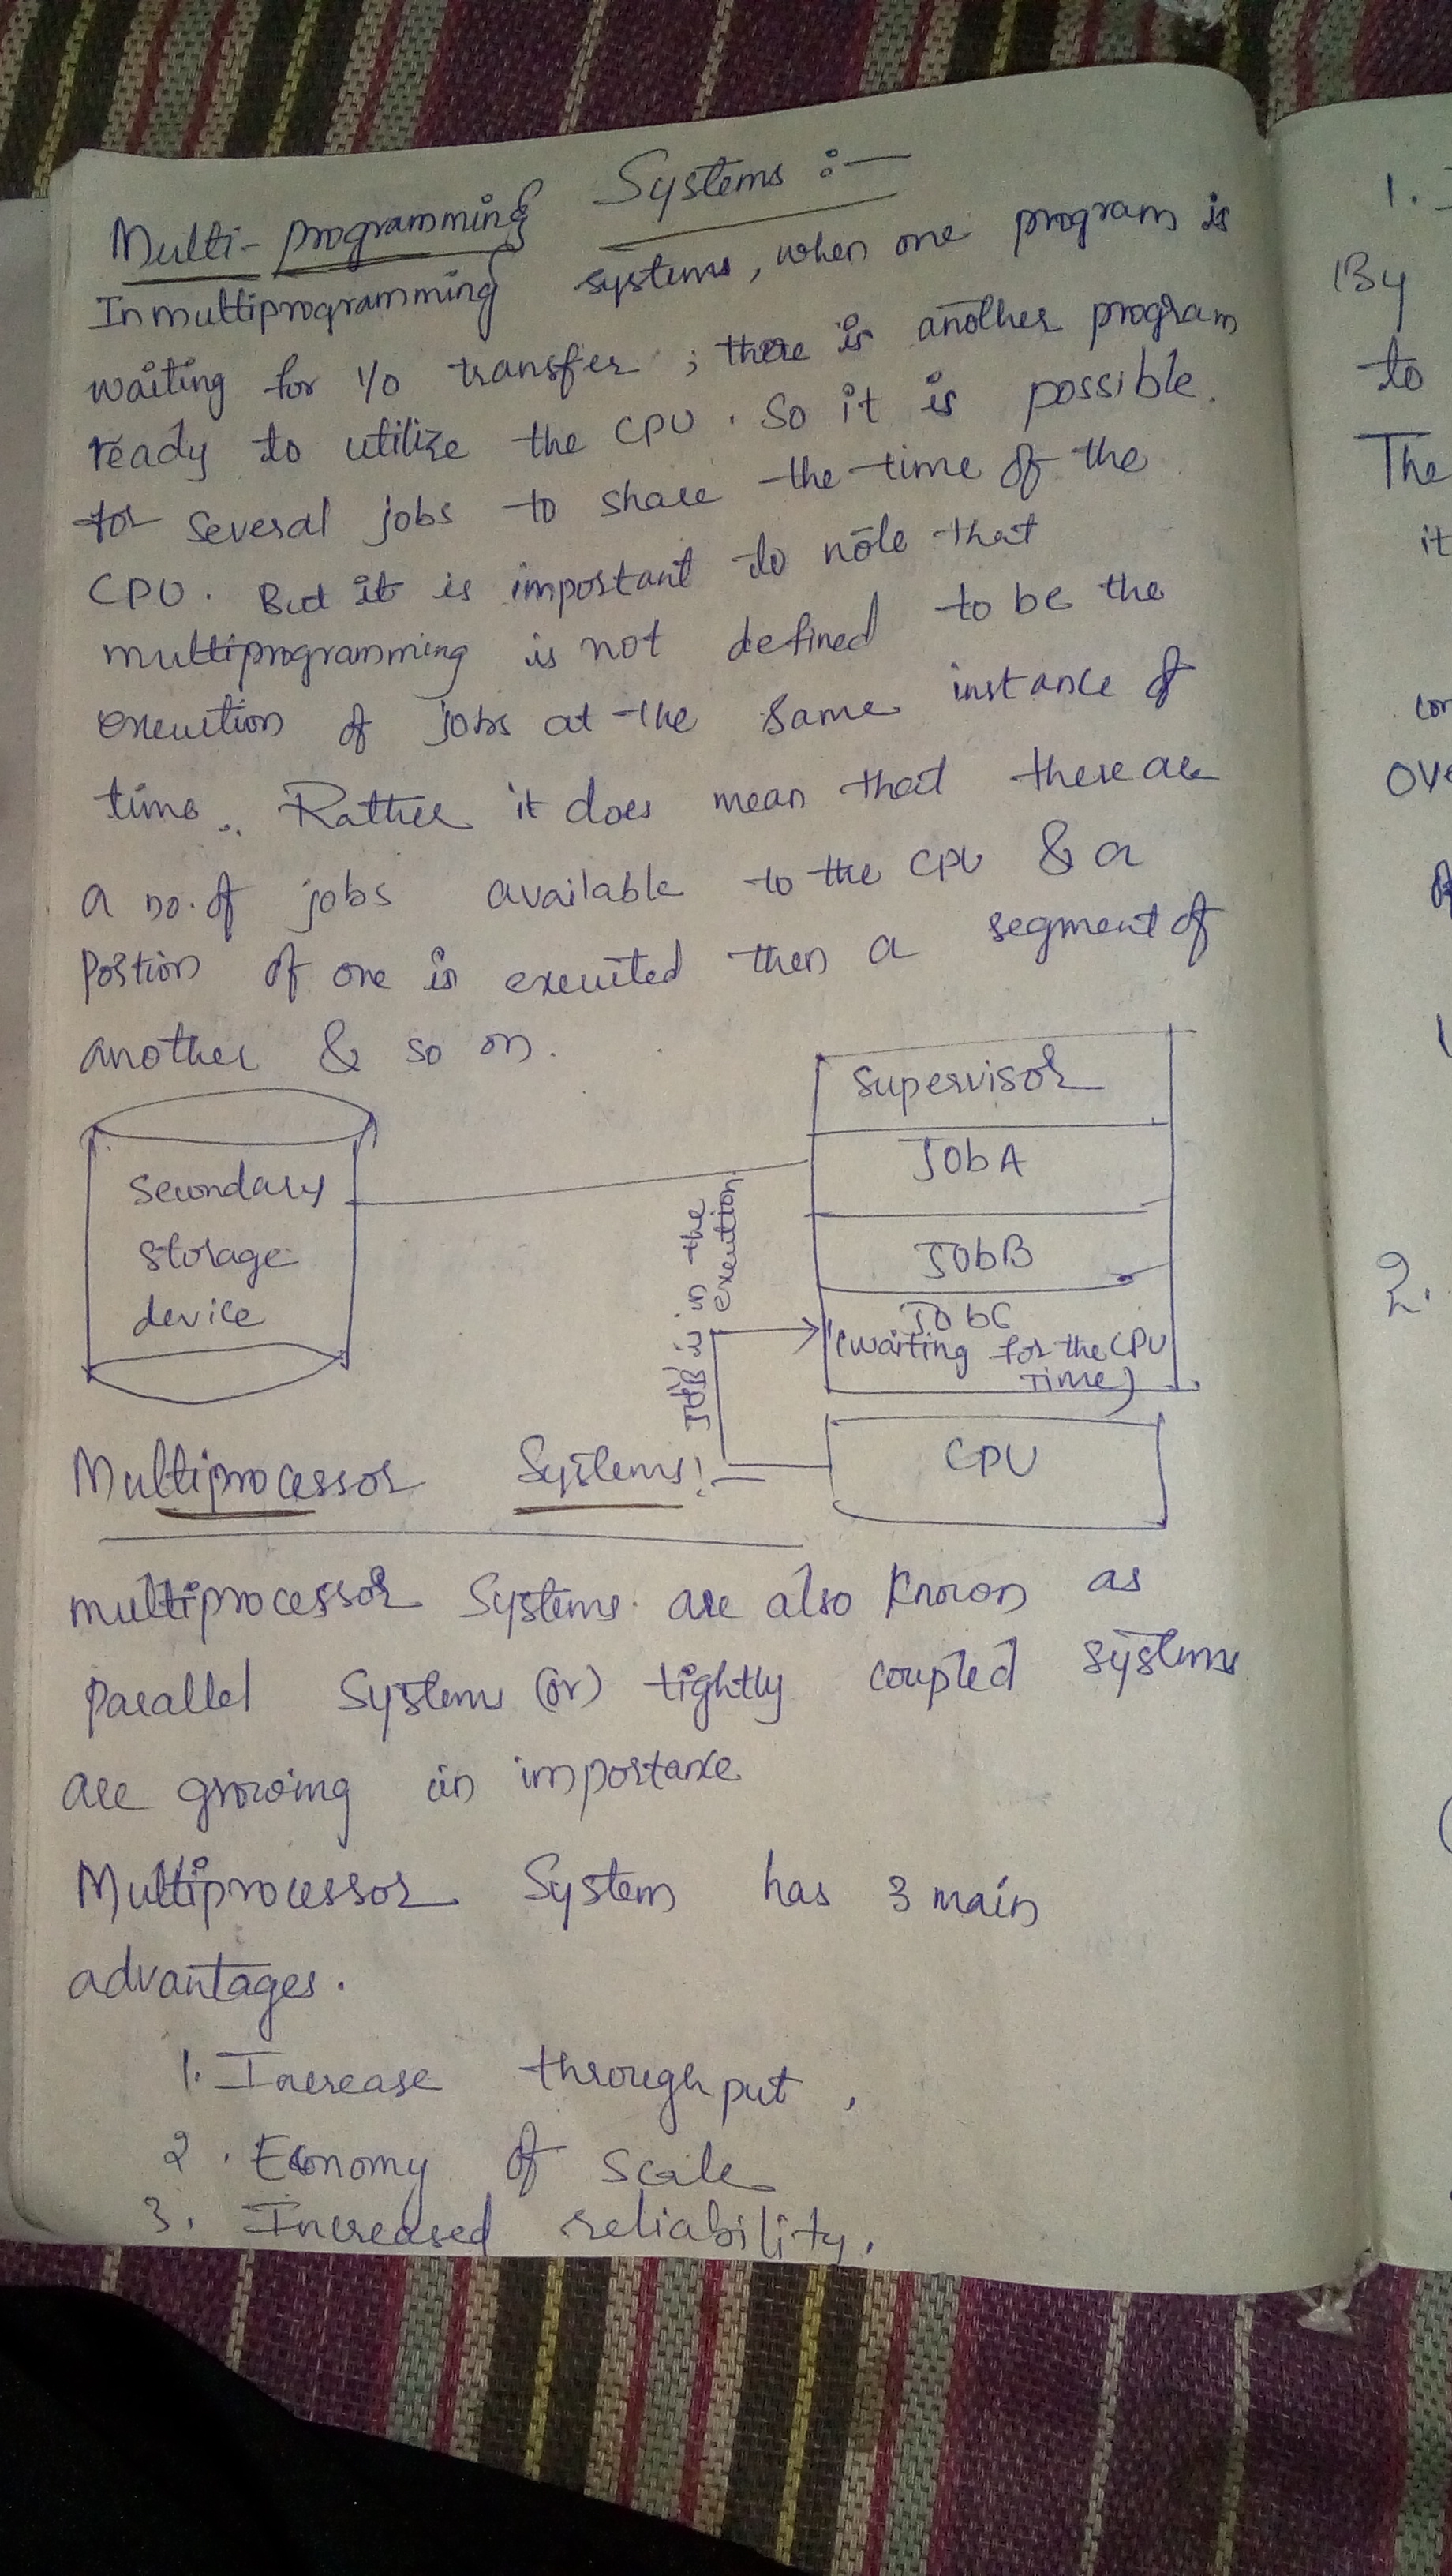 Multi programming and multi processing systems-15683789231241055393462.jpg